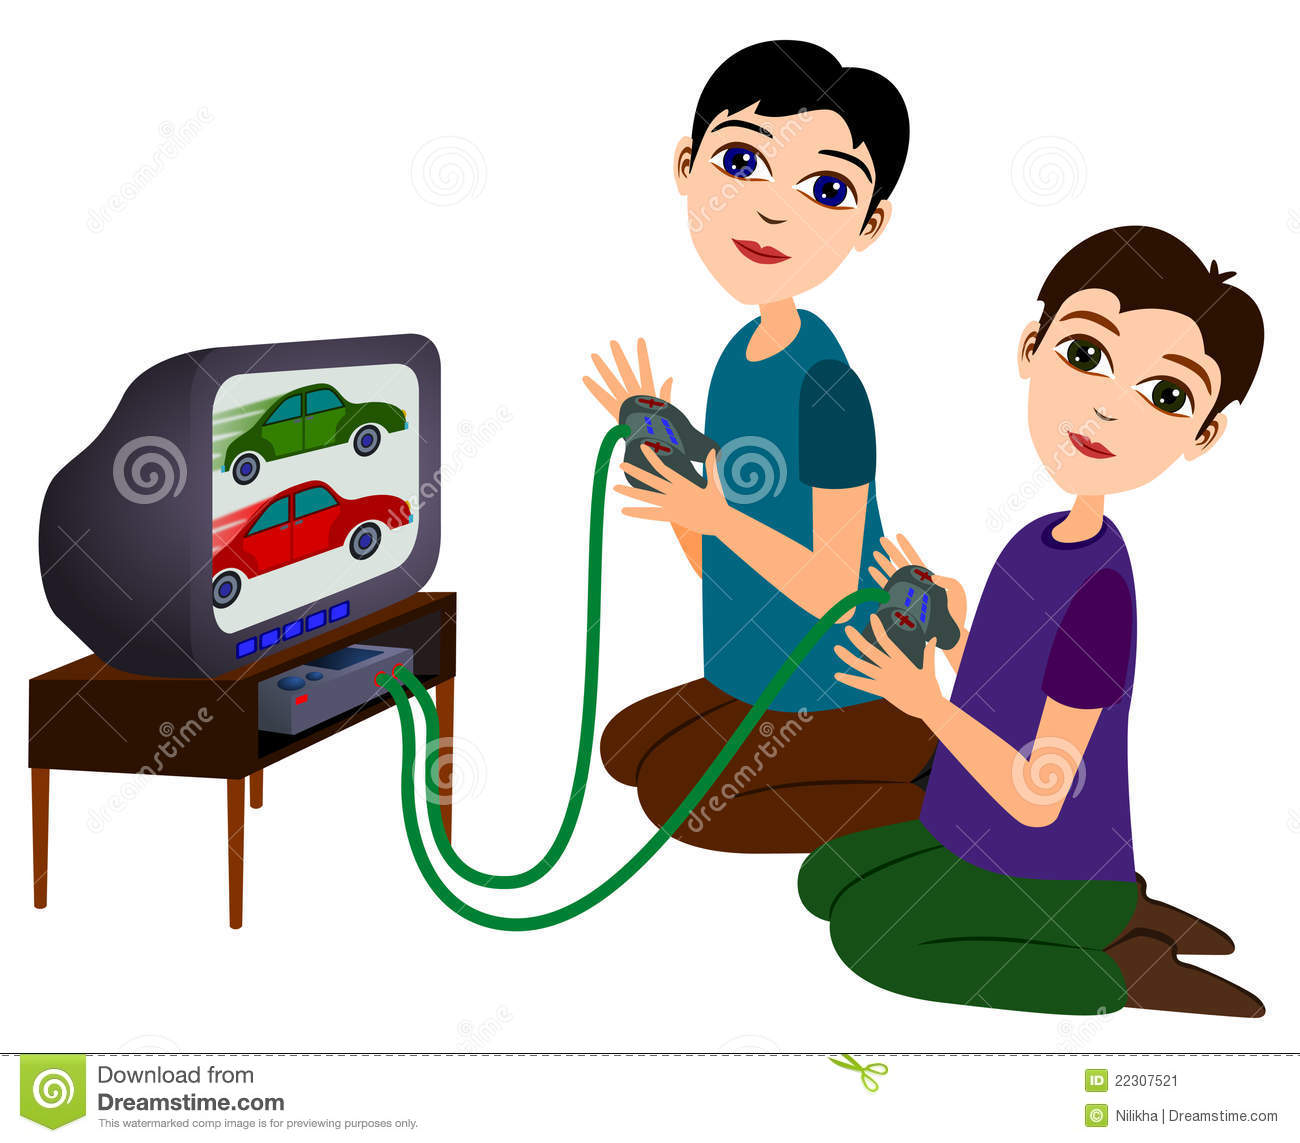 Illustration Of Two Cute Cartoon Boys Playing A Video Game